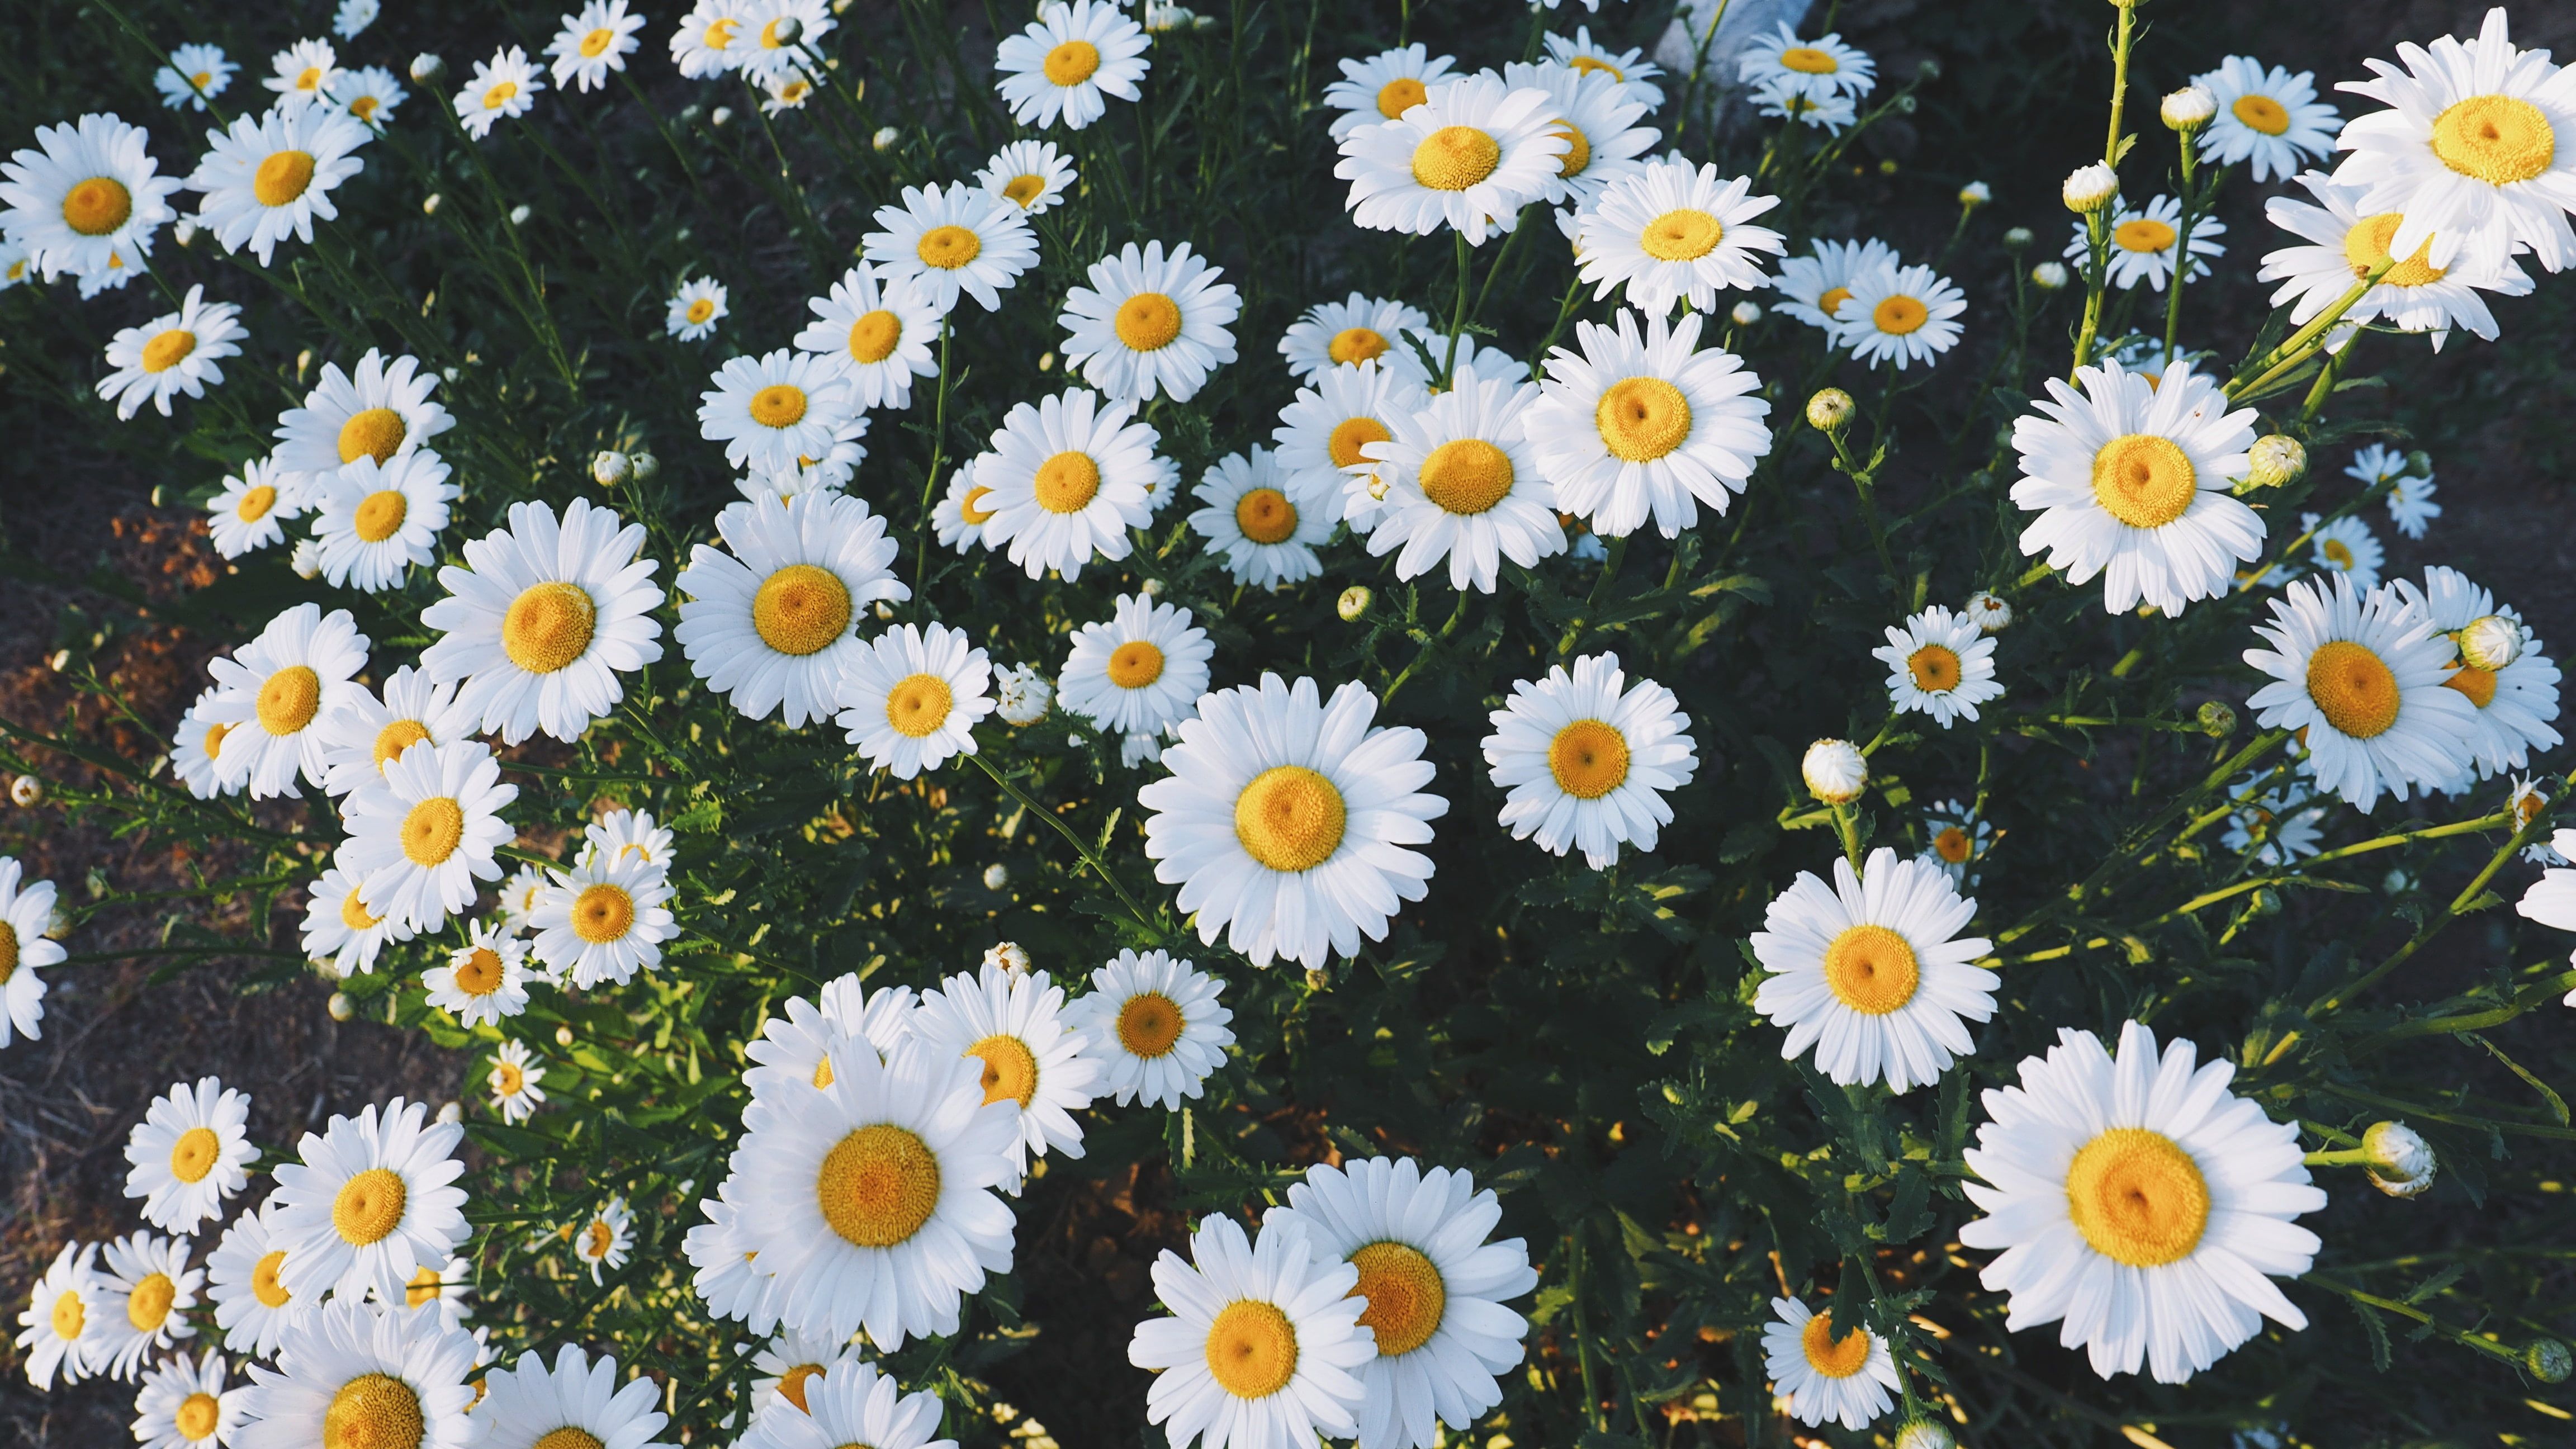 A close up of some white daisies - Daisy